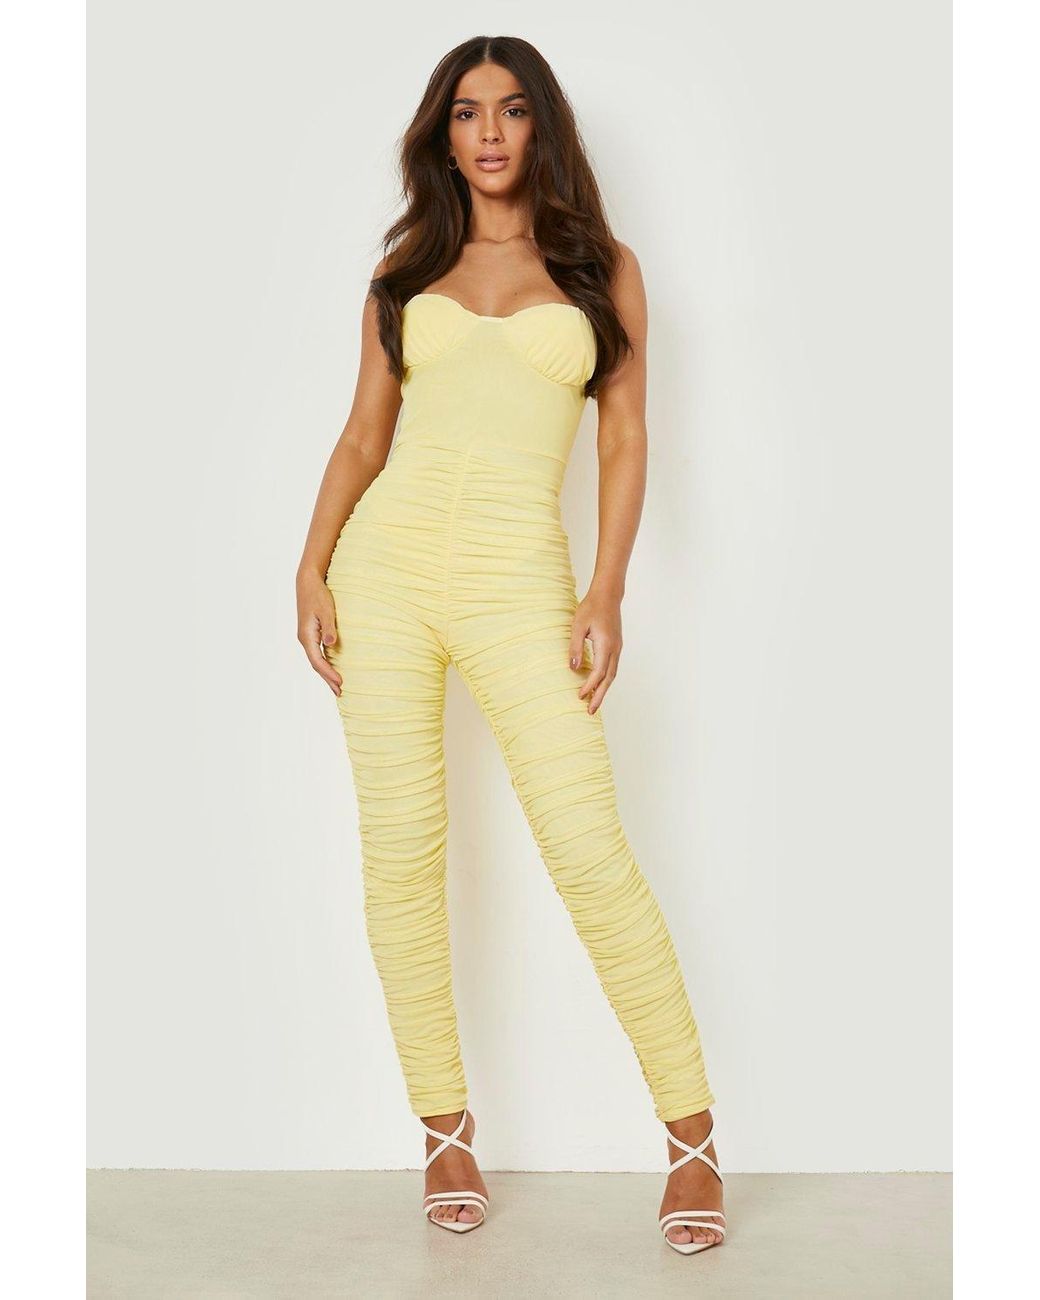 Boohoo Mesh Ruched Detail Bandeau Jumpsuit in Yellow | Lyst